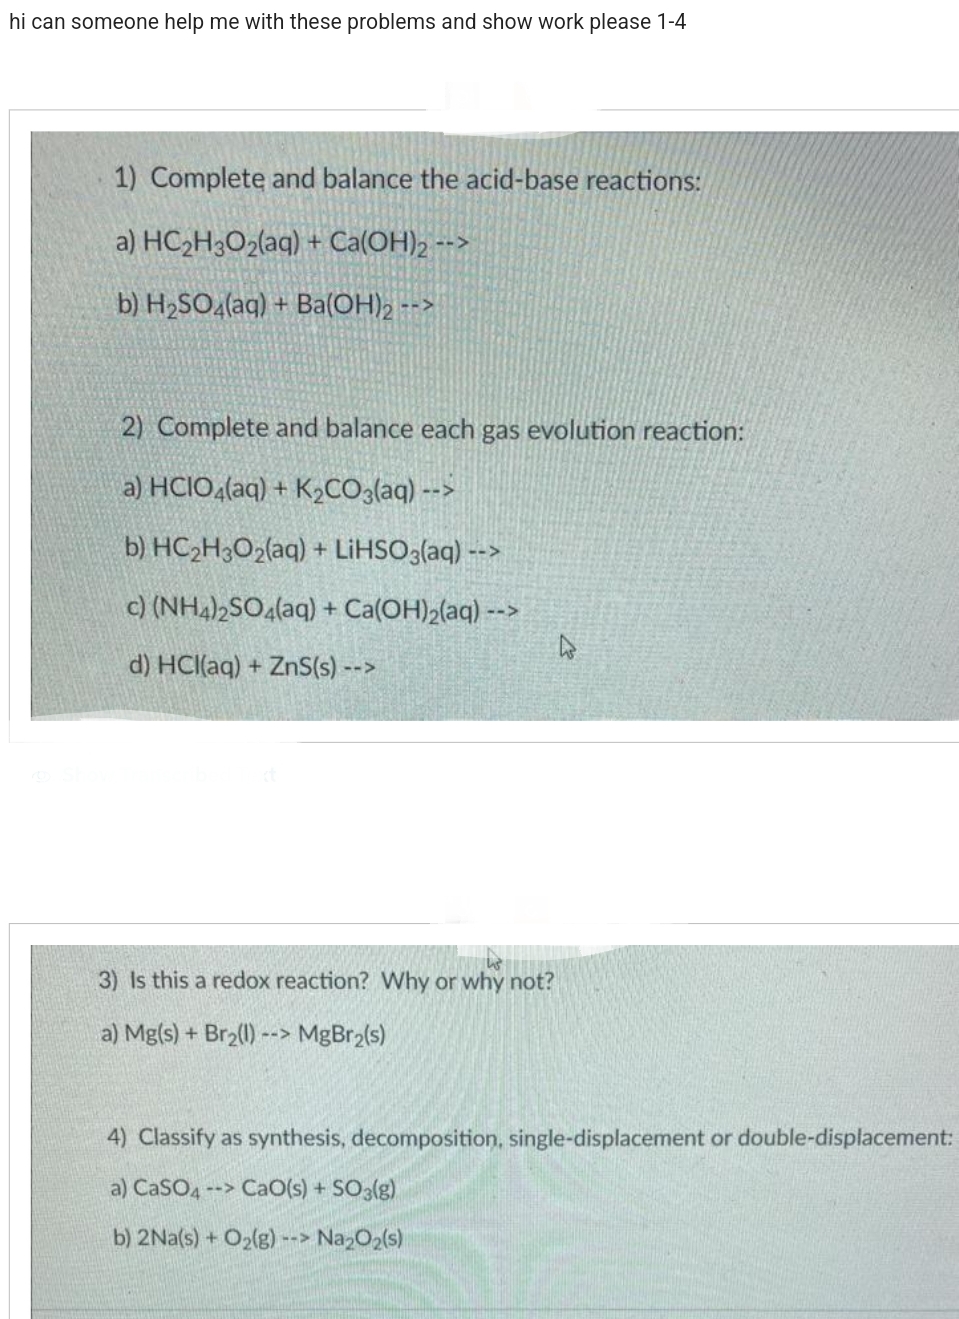 hi can someone help me with these problems and show work please 1-4
1) Complete and balance the acid-base reactions:
a) HC₂H3O₂(aq) + Ca(OH)2 -->
b) H₂SO4(aq) + Ba(OH)₂ -->
2) Complete and balance each gas evolution reaction:
a) HCIO4(aq) + K₂CO3(aq) -->
b) HC₂H3O2(aq) + LiHSO3(aq) -->
c) (NH4)2SO4(aq) + Ca(OH)₂(aq) -->
d) HCl(aq) + ZnS(s) -->
3) Is this a redox reaction? Why or why not?
a) Mg(s) + Br₂(1) --> MgBr₂(s)
4
4) Classify as synthesis, decomposition, single-displacement or double-displacement:
a) CaSO4 --> CaO(s) + SO3(g)
b) 2Na(s) + O₂(g) --> Na₂O₂(s)